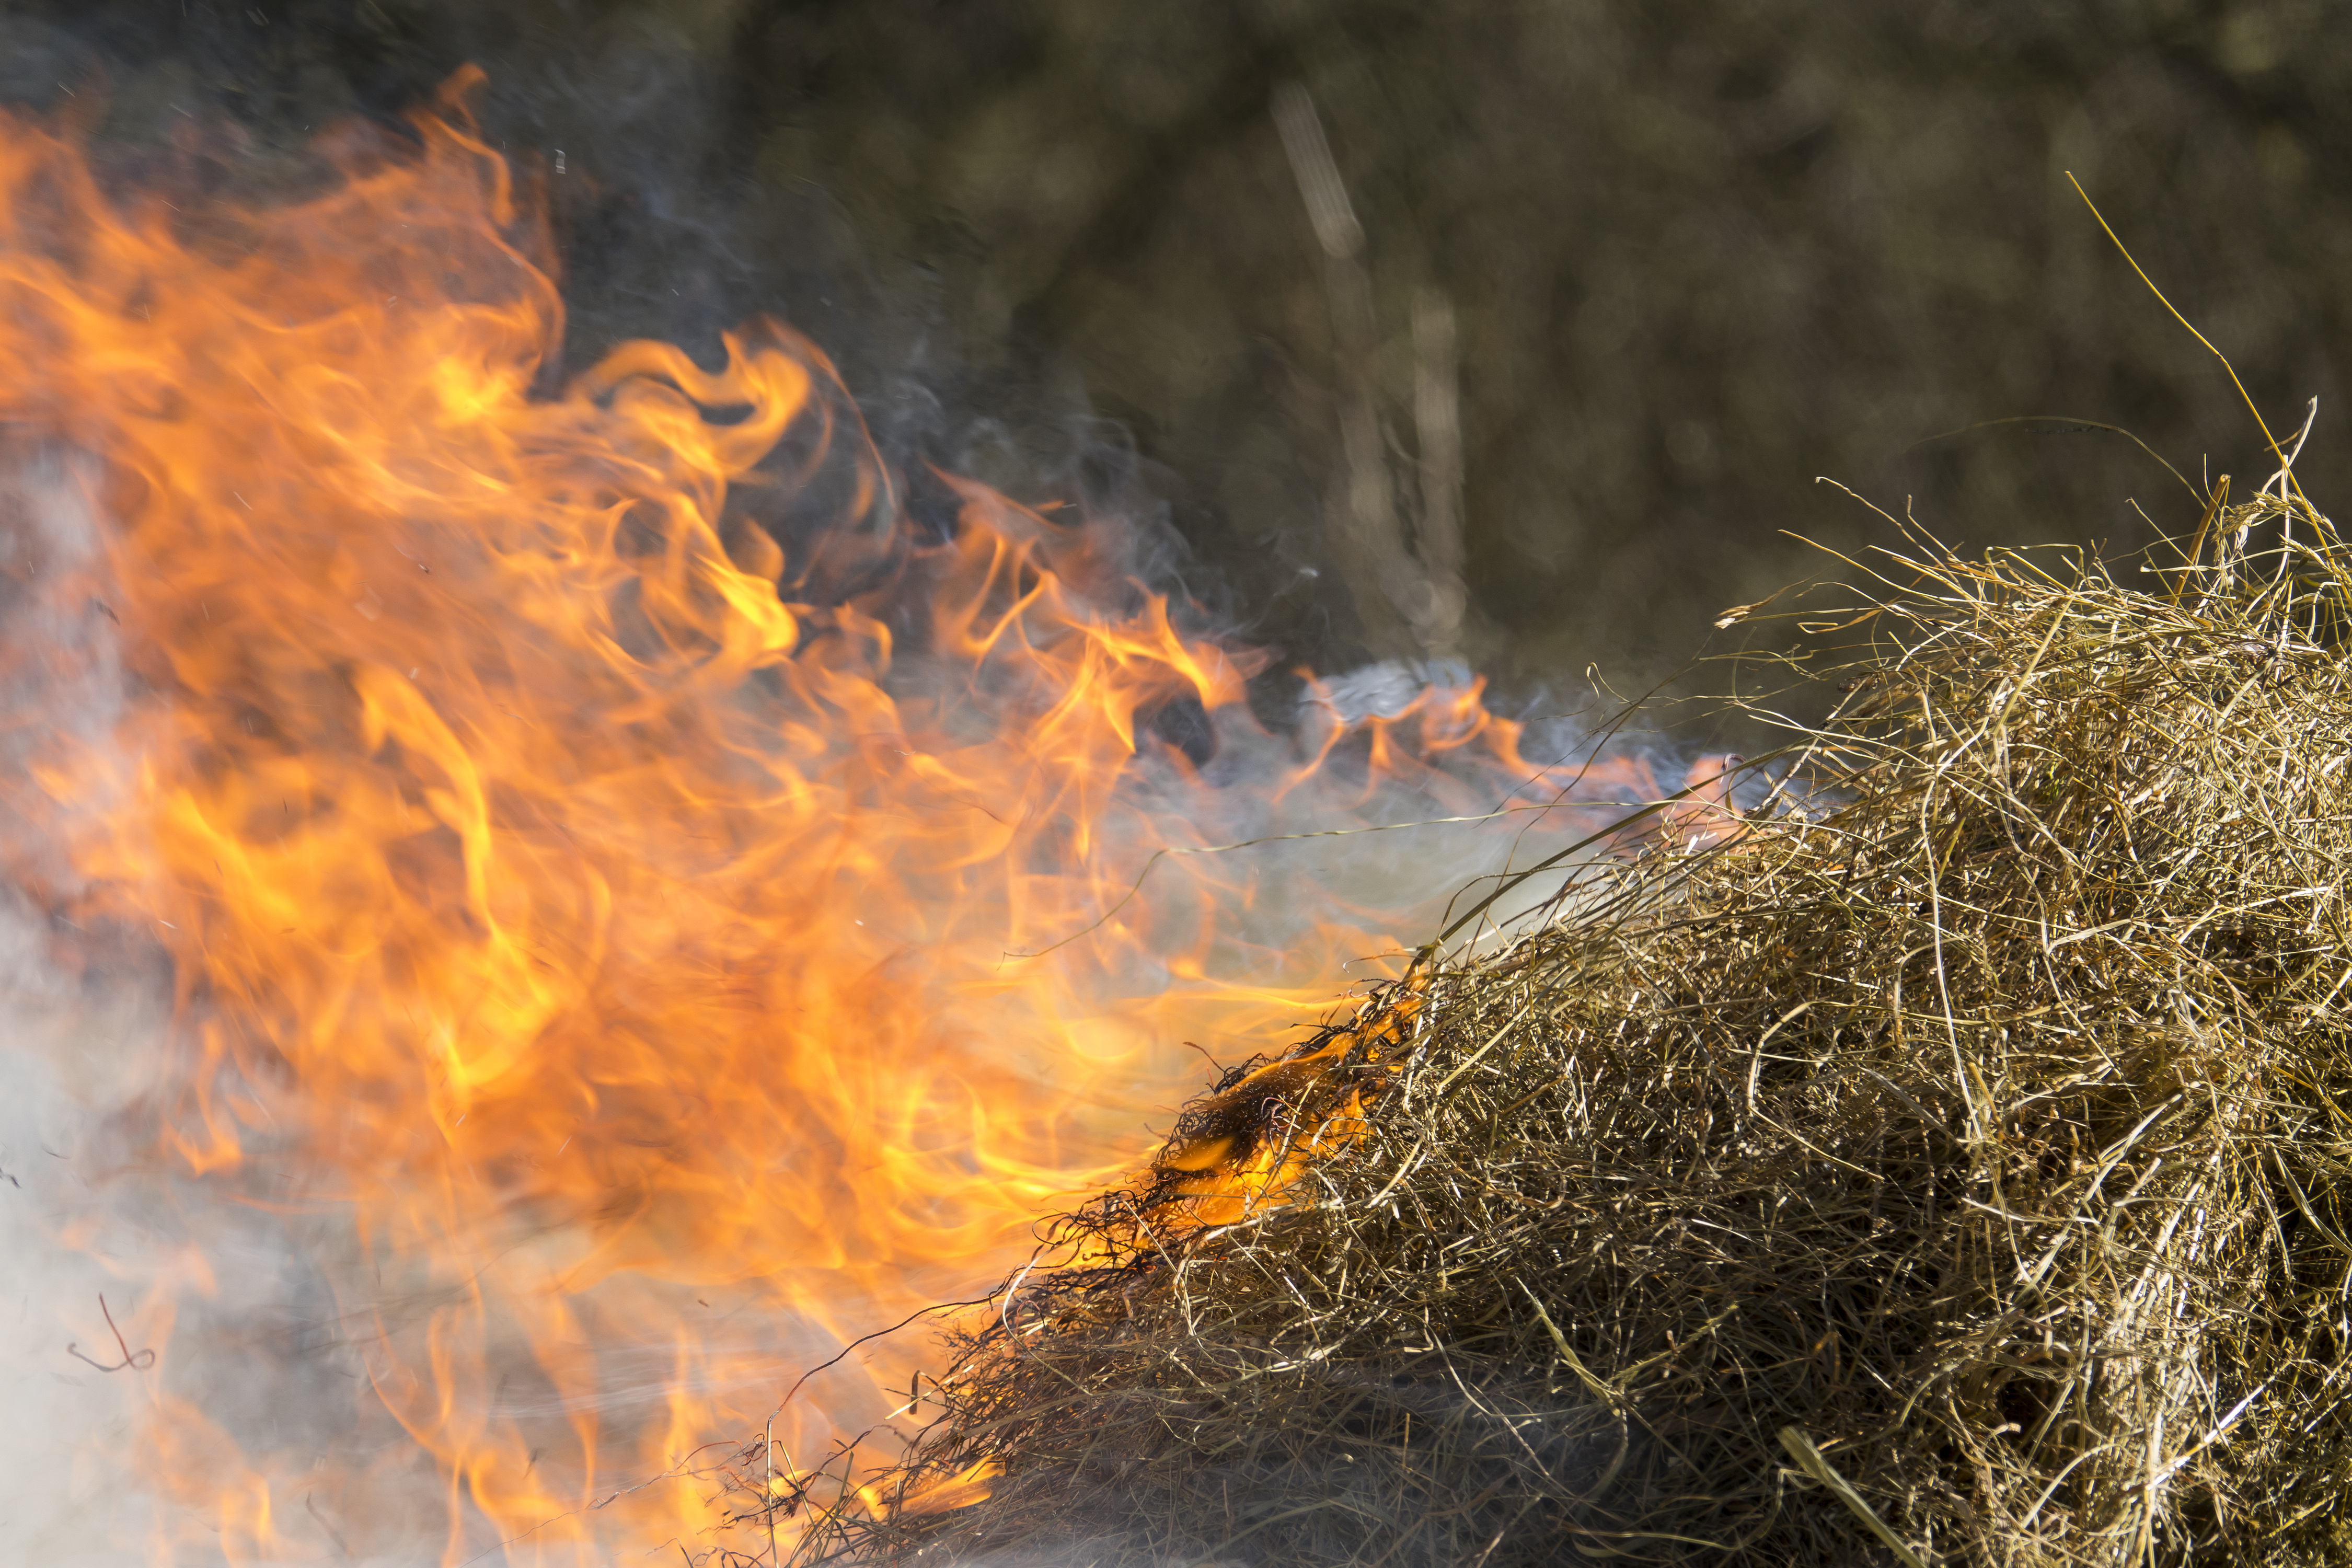 A bale of hay on fire 